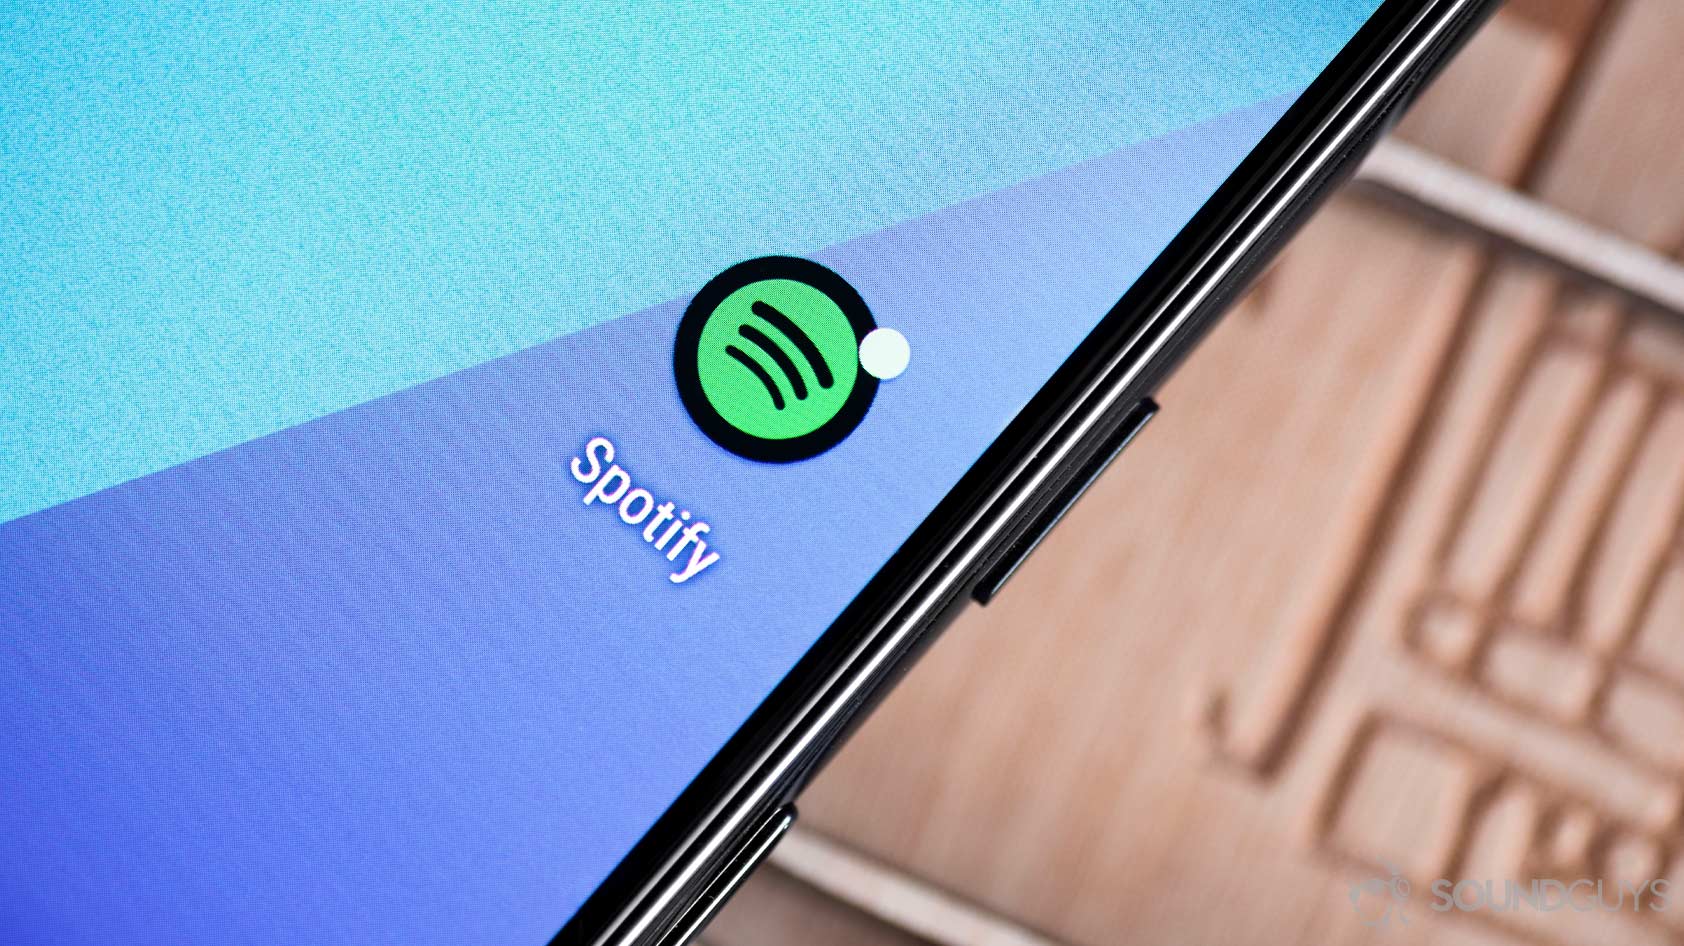 Spotify app icon on the Google Pixel 3 home screen.